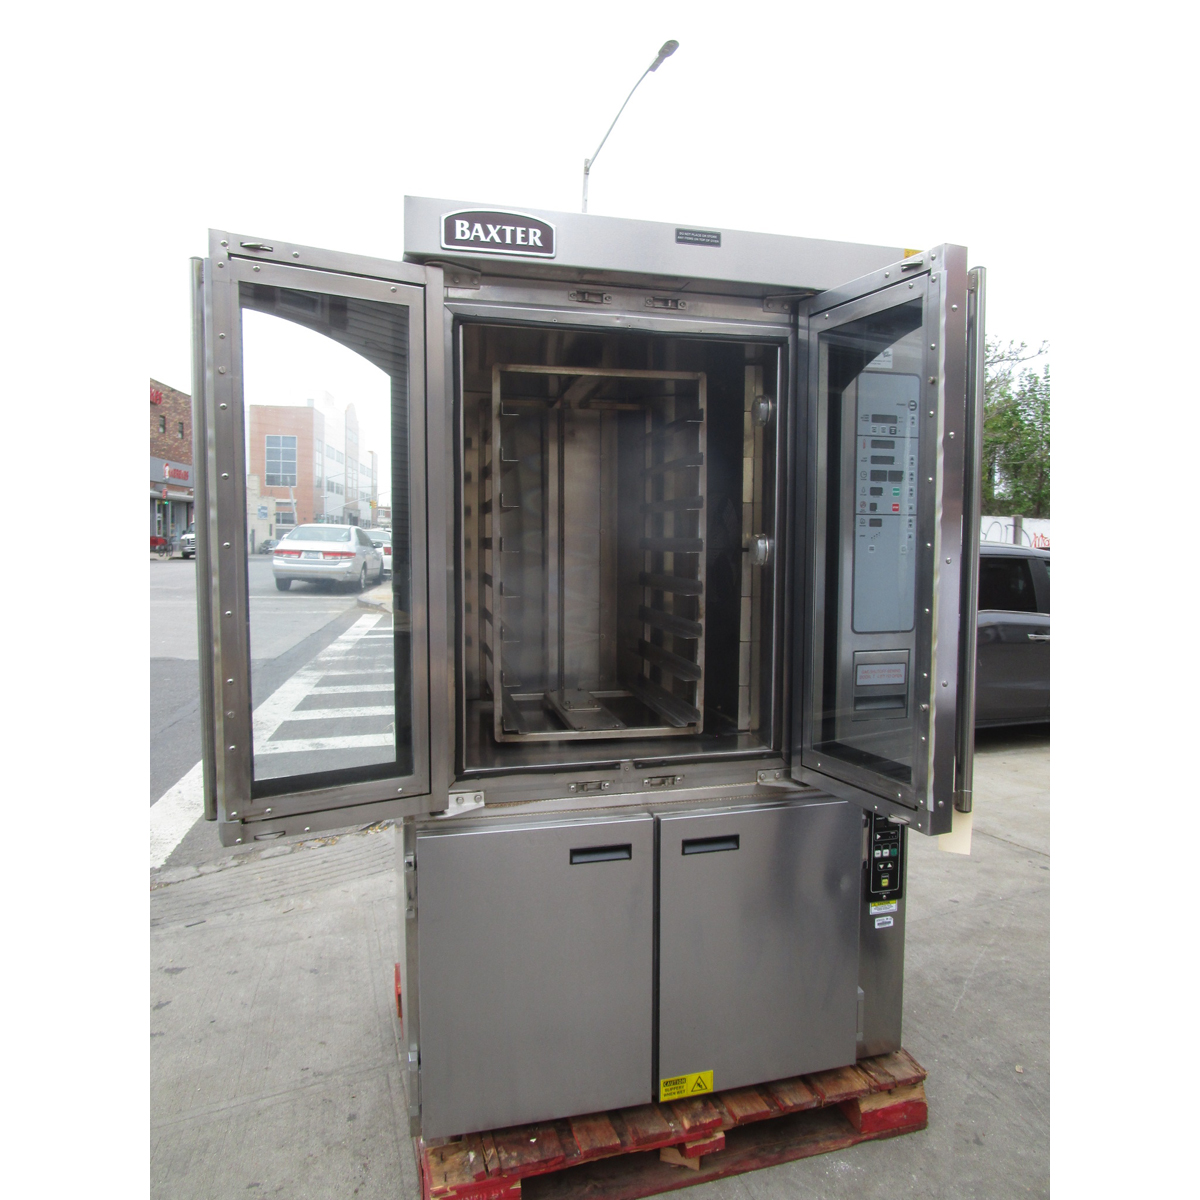 Baxter OV310G Mini Rack Oven With MB300 Proofer, Used Great Condition image 3